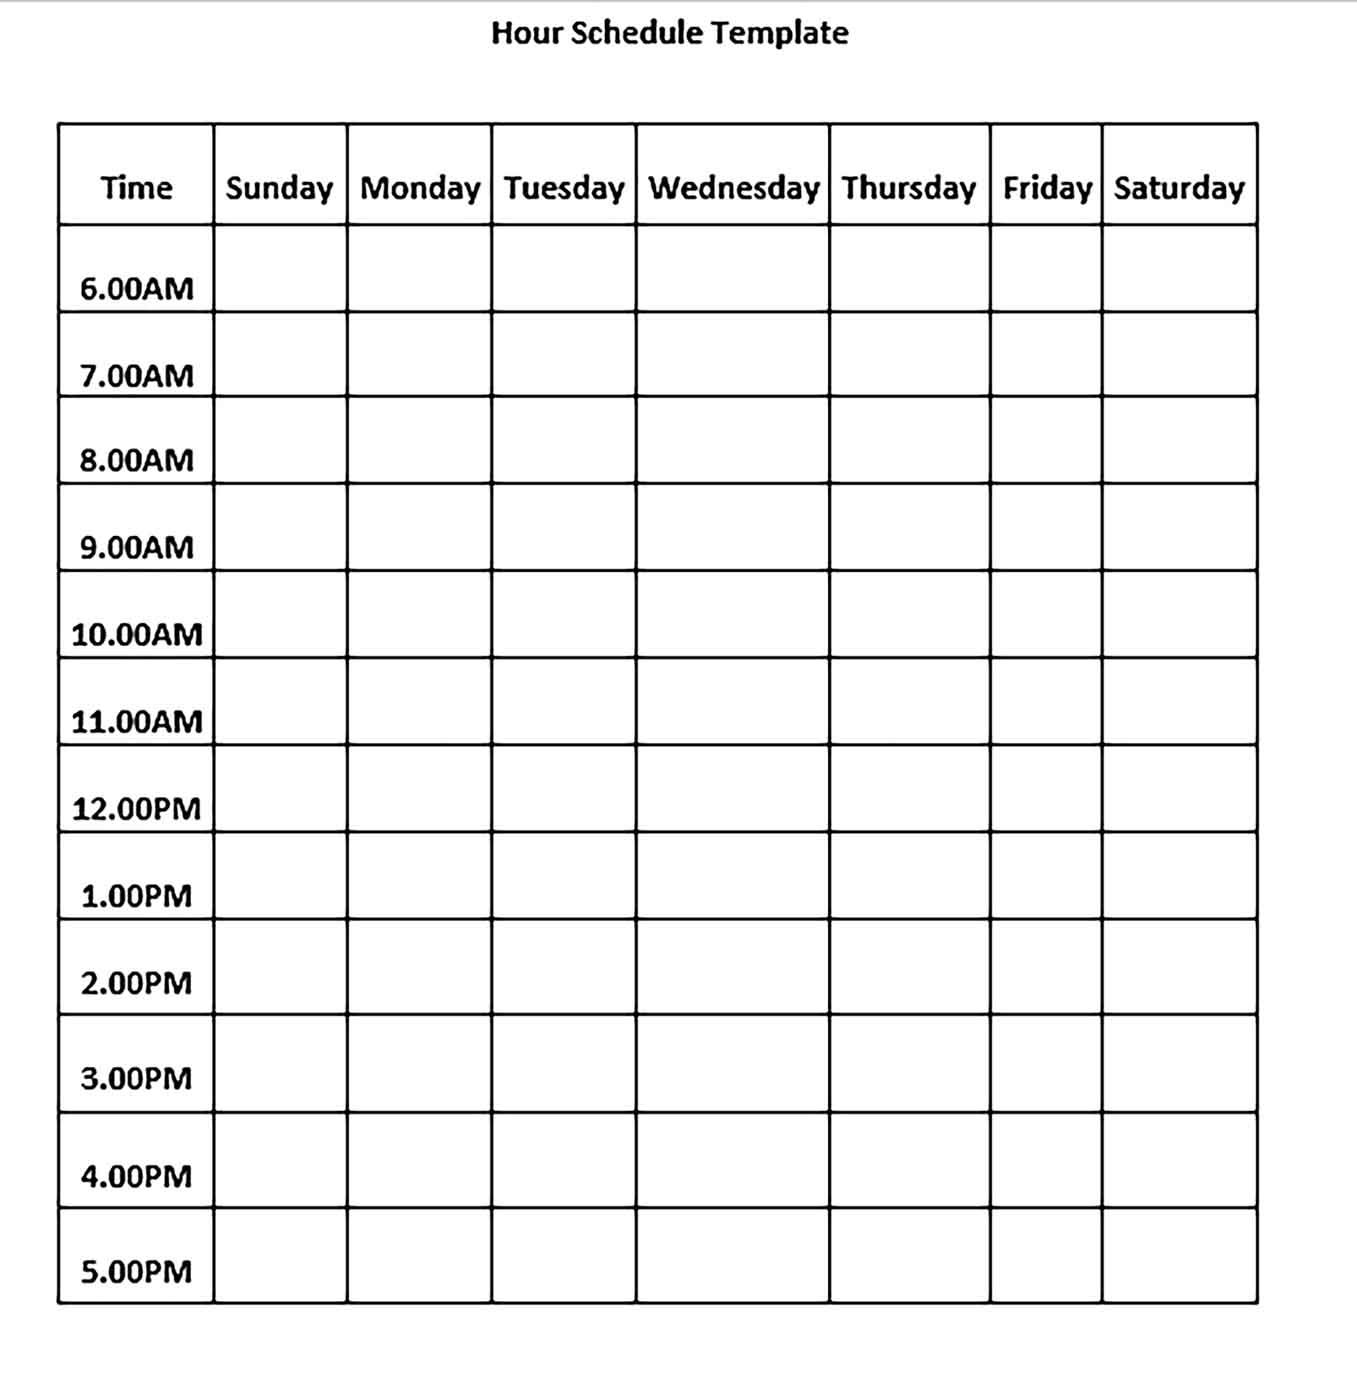 Template hourly schedule Sample 001